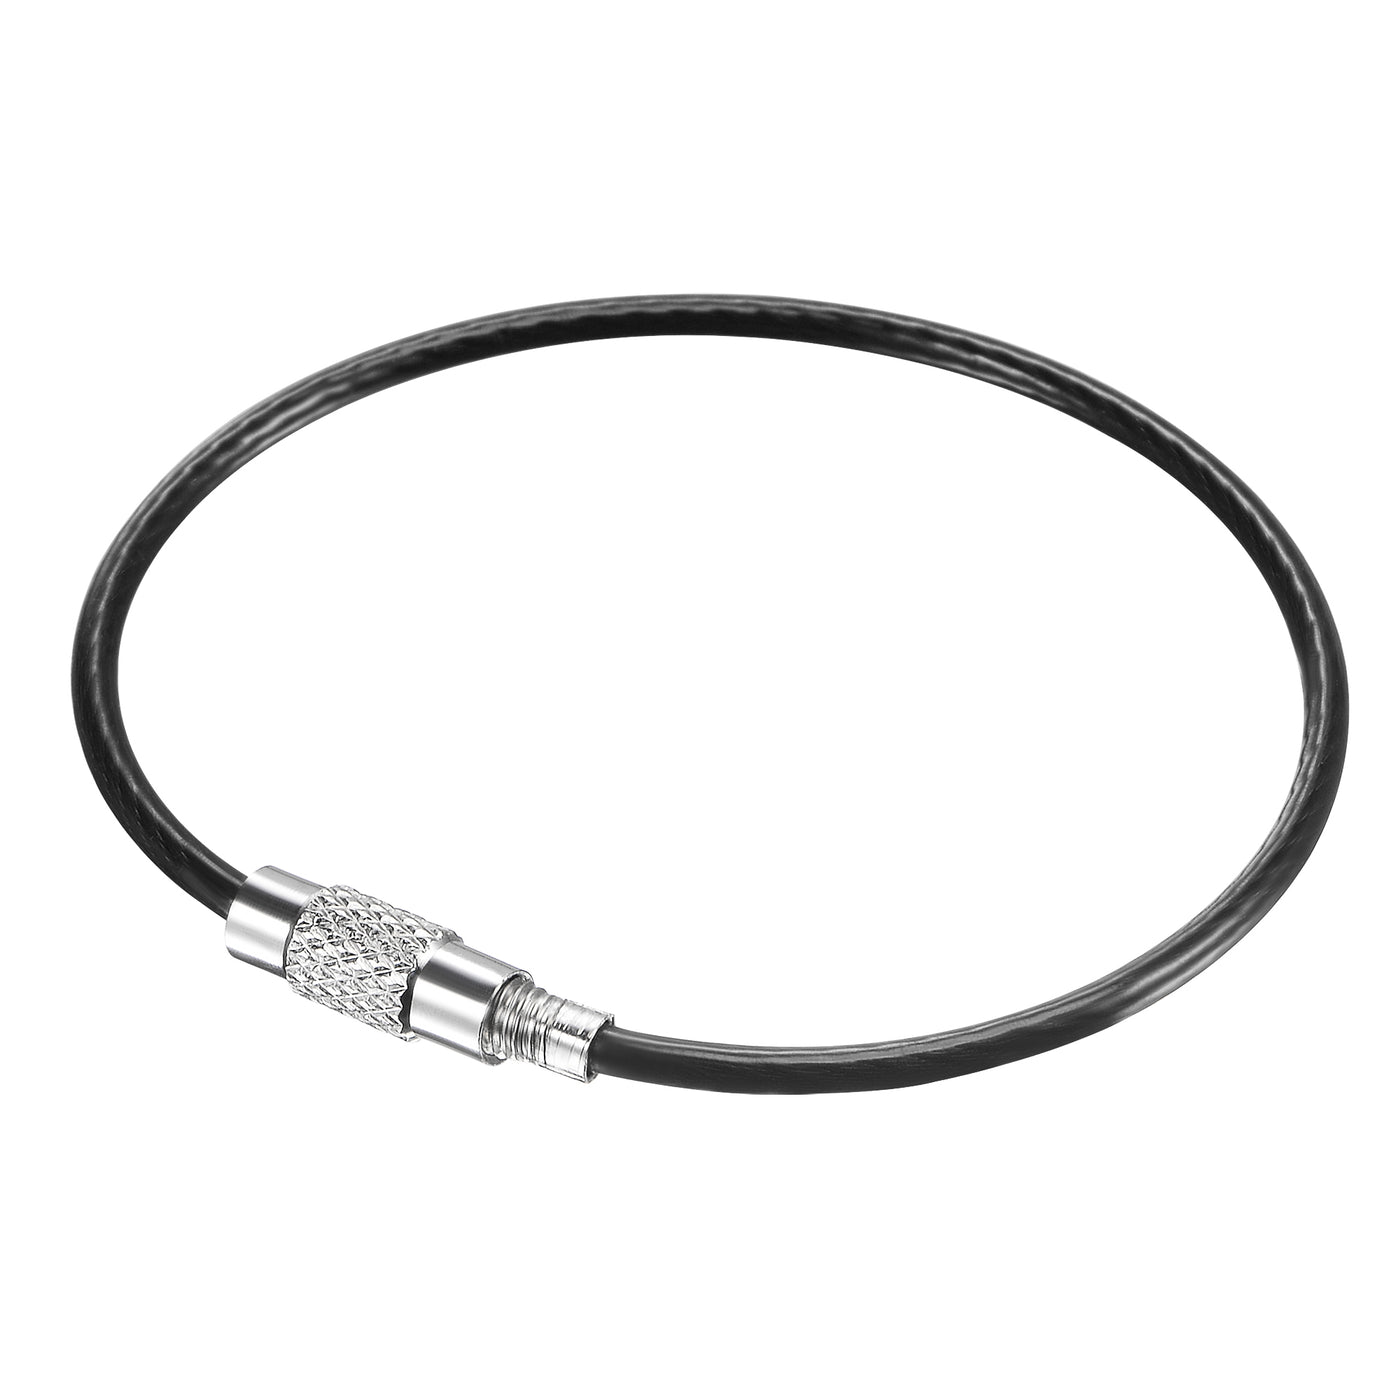 Uxcell Uxcell Wire Keychain 150mm Length Key Ring Loop Cable for Handbag Lanyard Zipper, PVC Coated Stainless Steel, Silver, Pack of 4